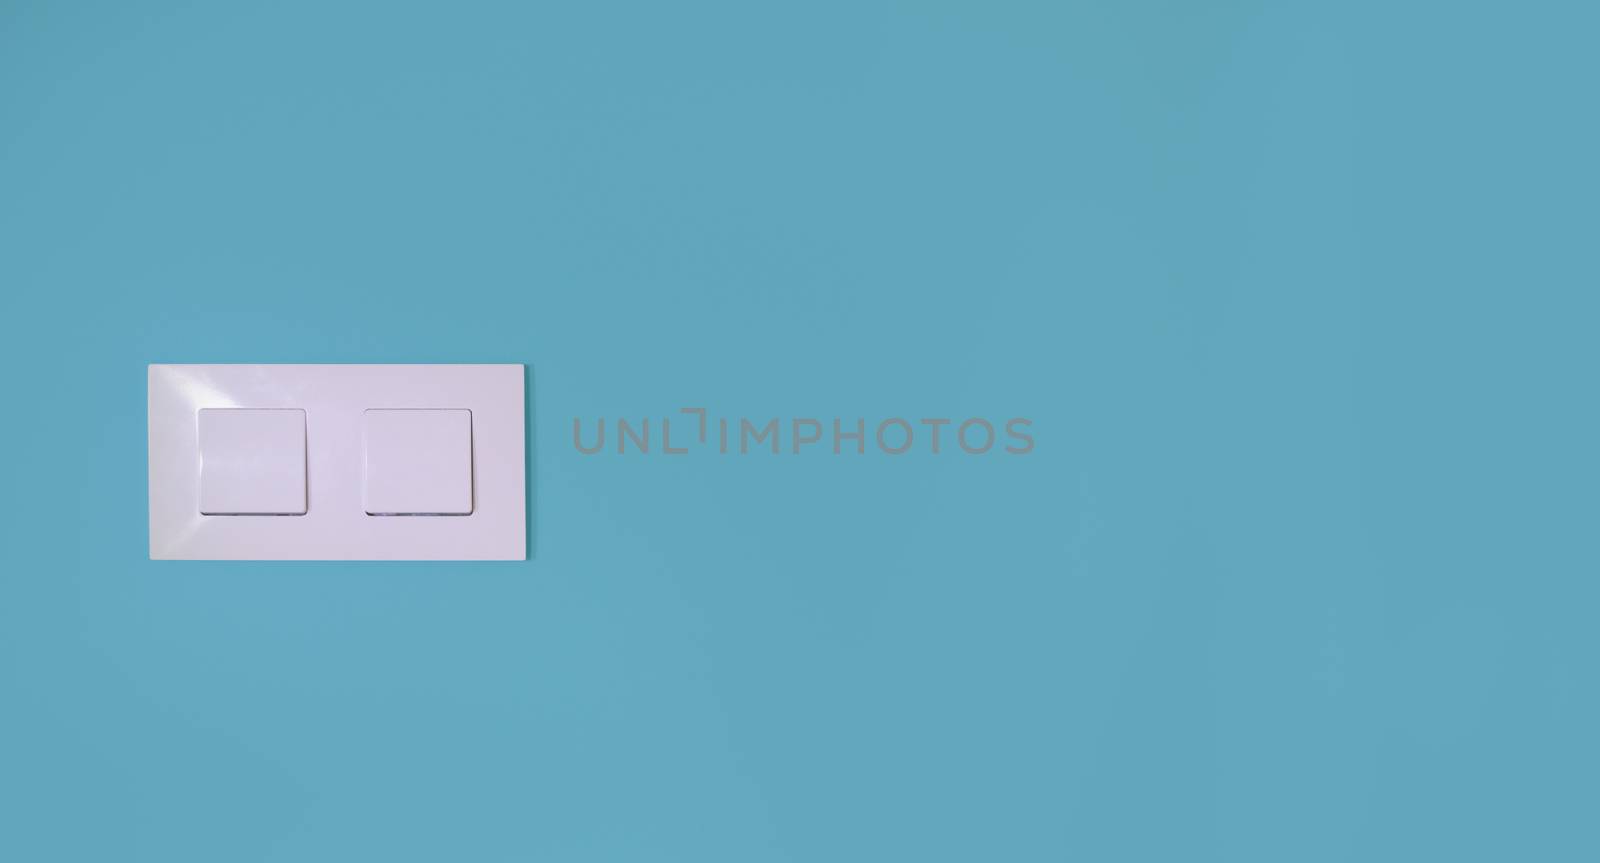 Light switch on a blue wall with copy space